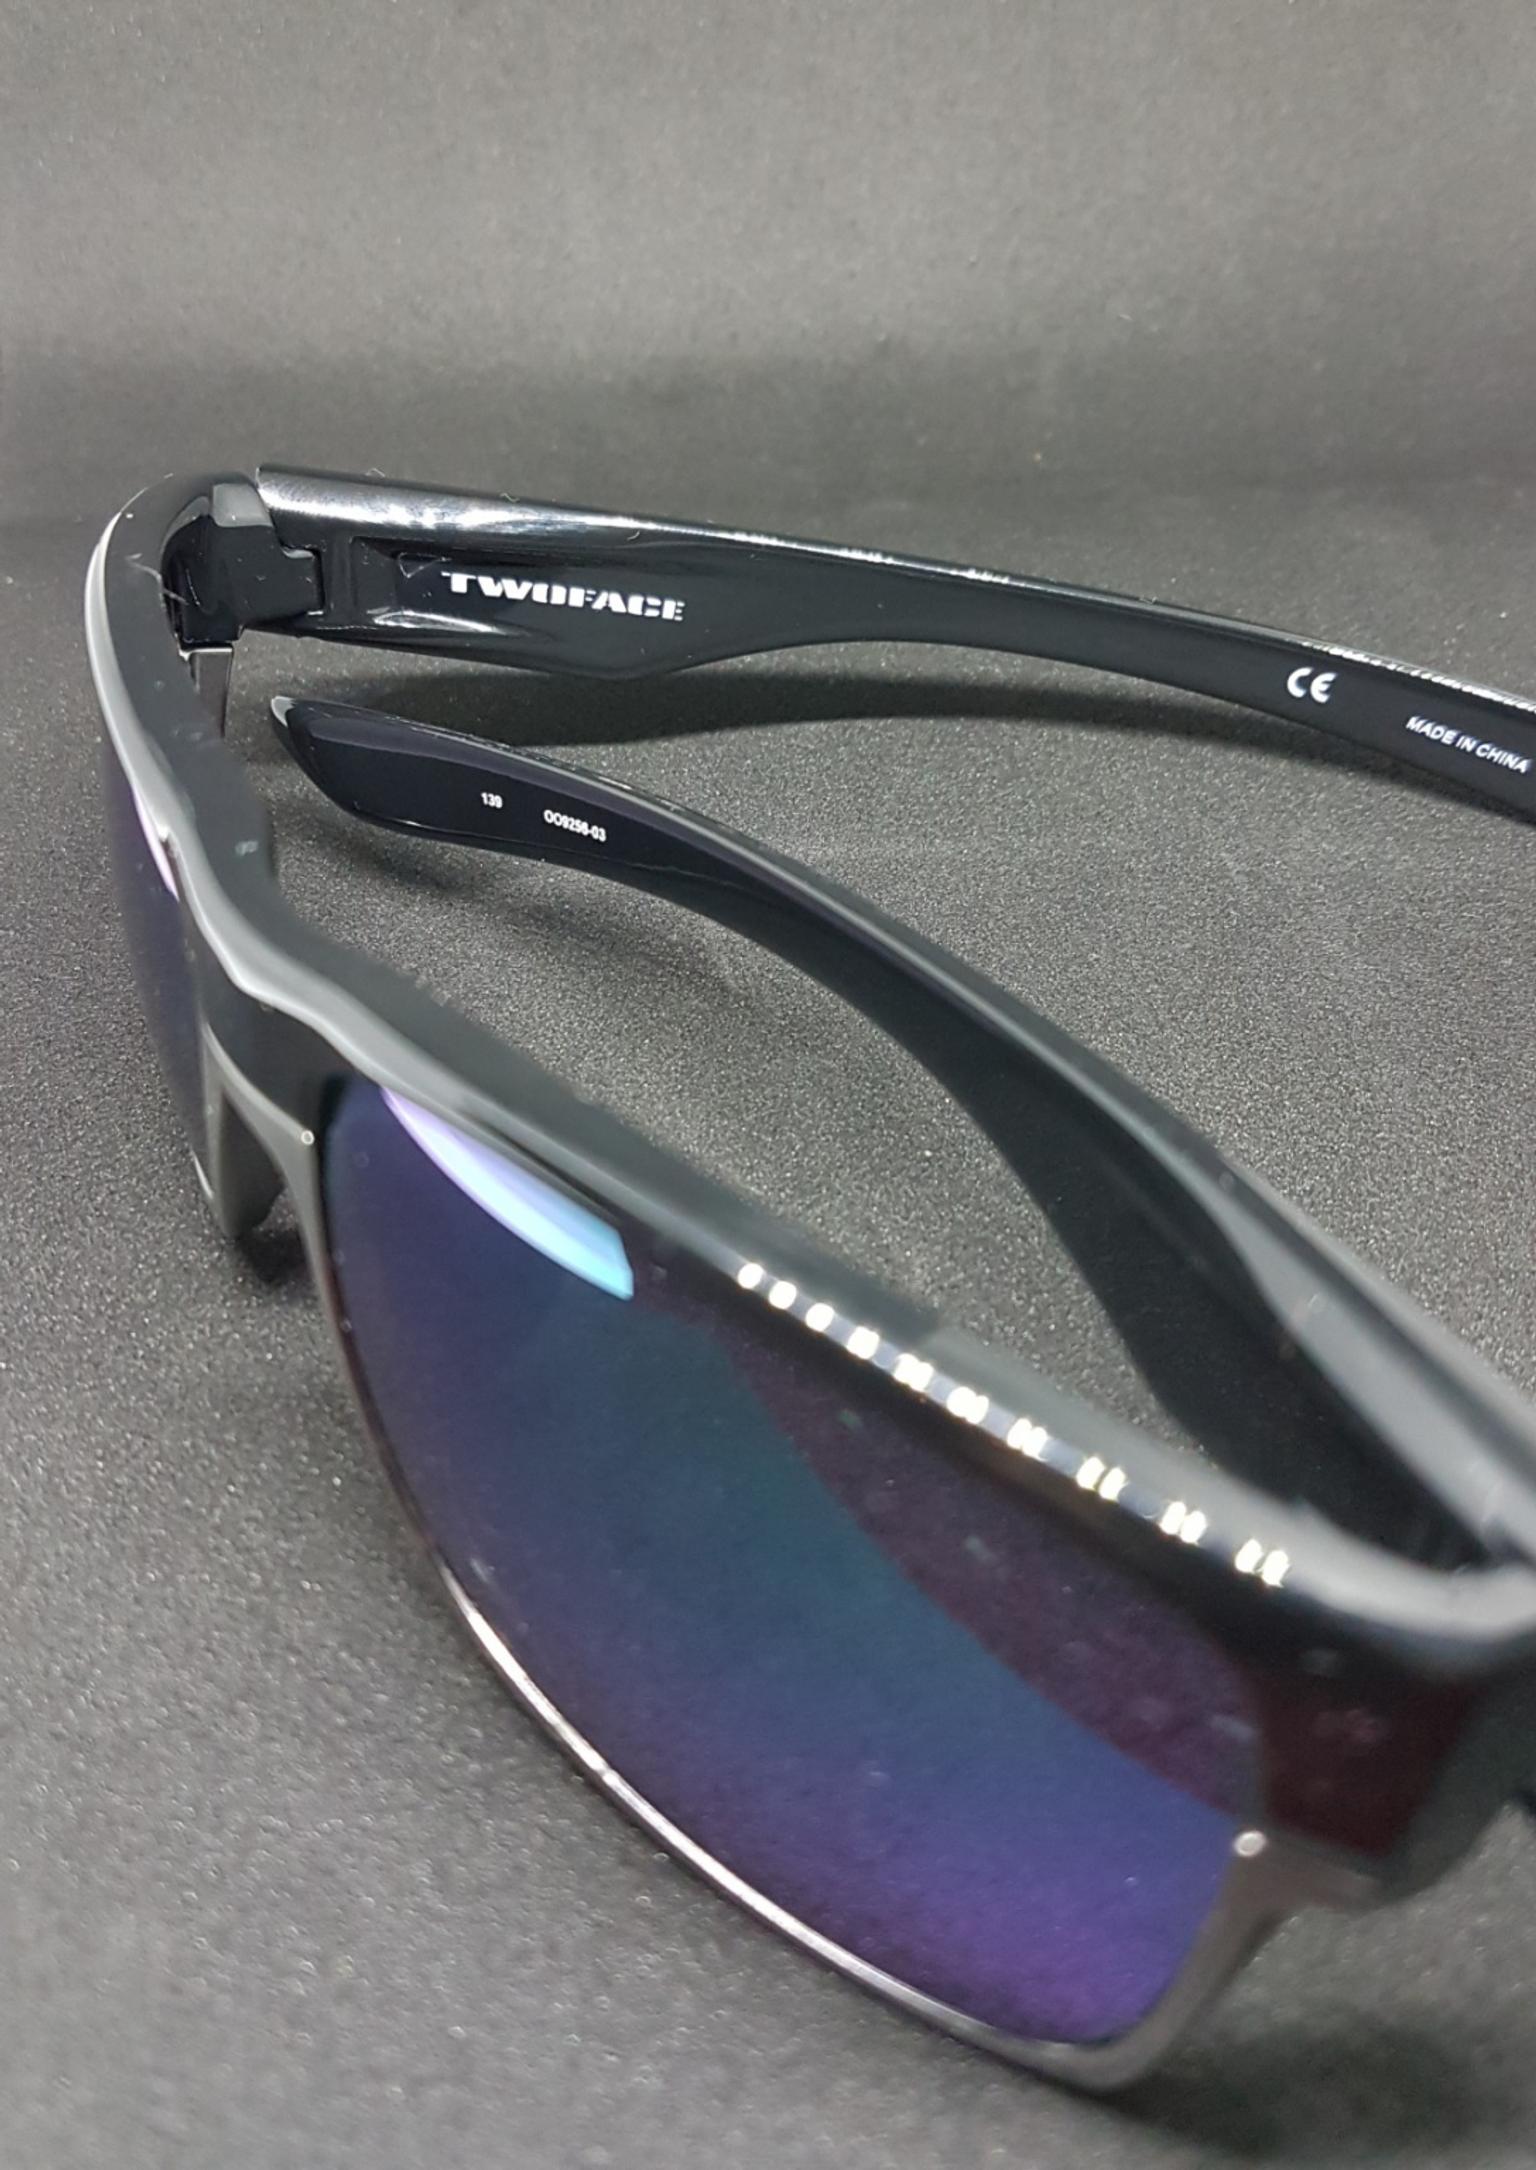 oakley twoface made in china 741fe1